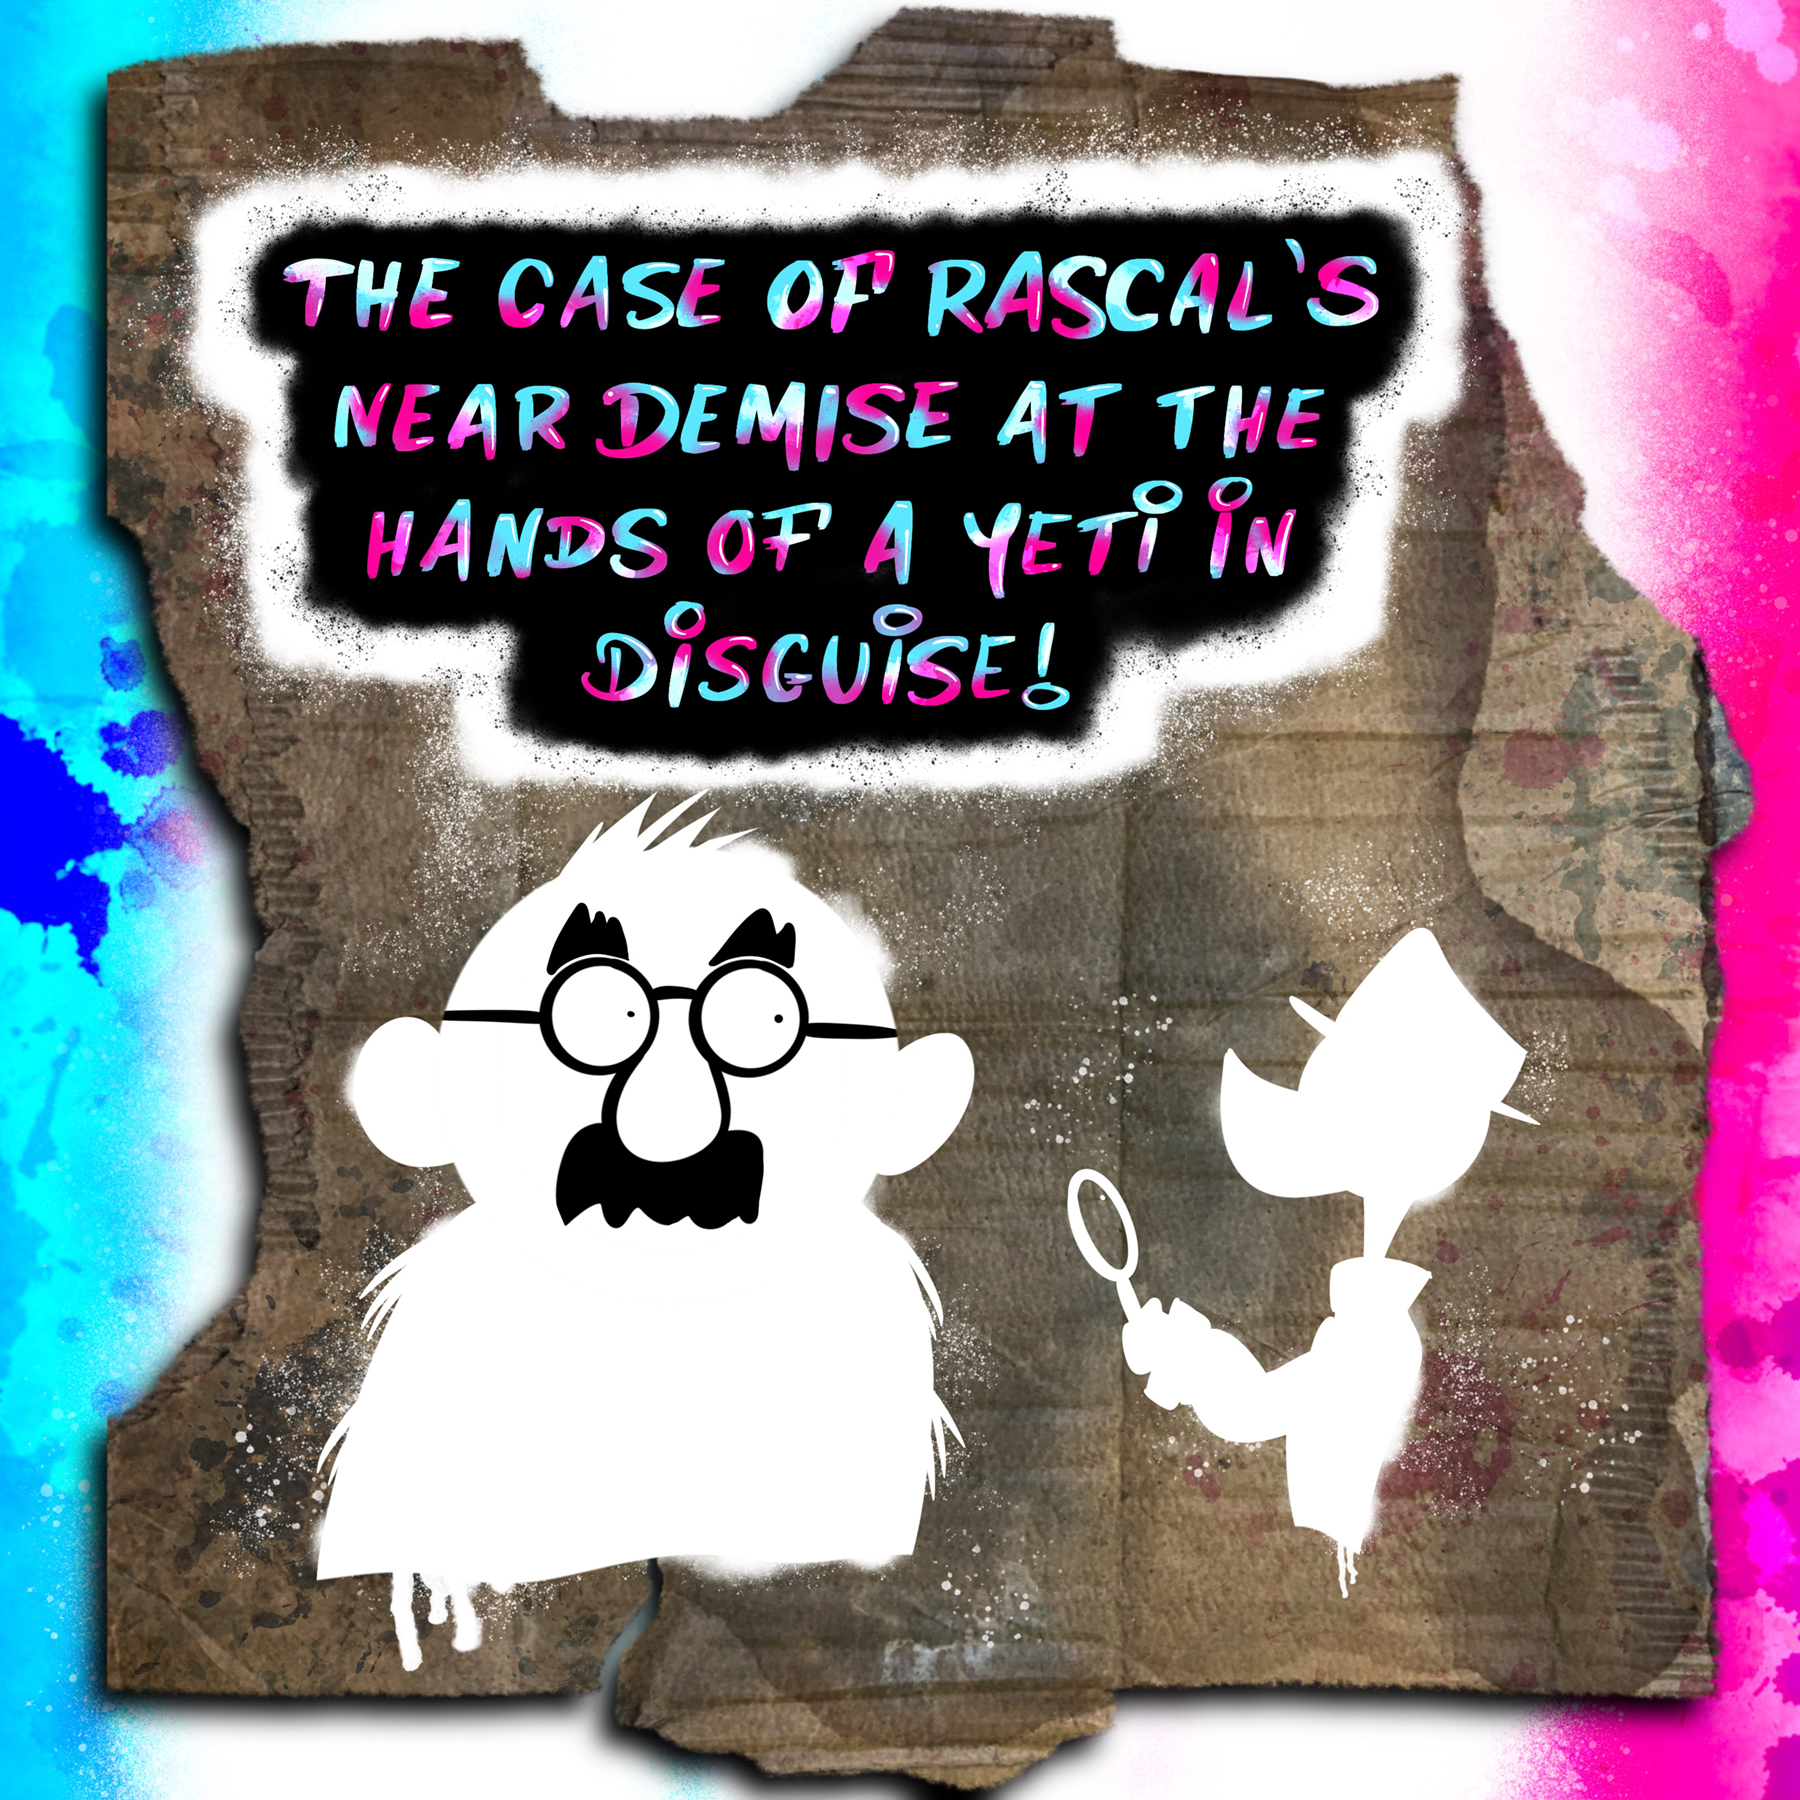 page from The Mudsuckle Ritual, "The case of Rascal's near demise t the hands of a yeti in disguise," image courtesy of the artist